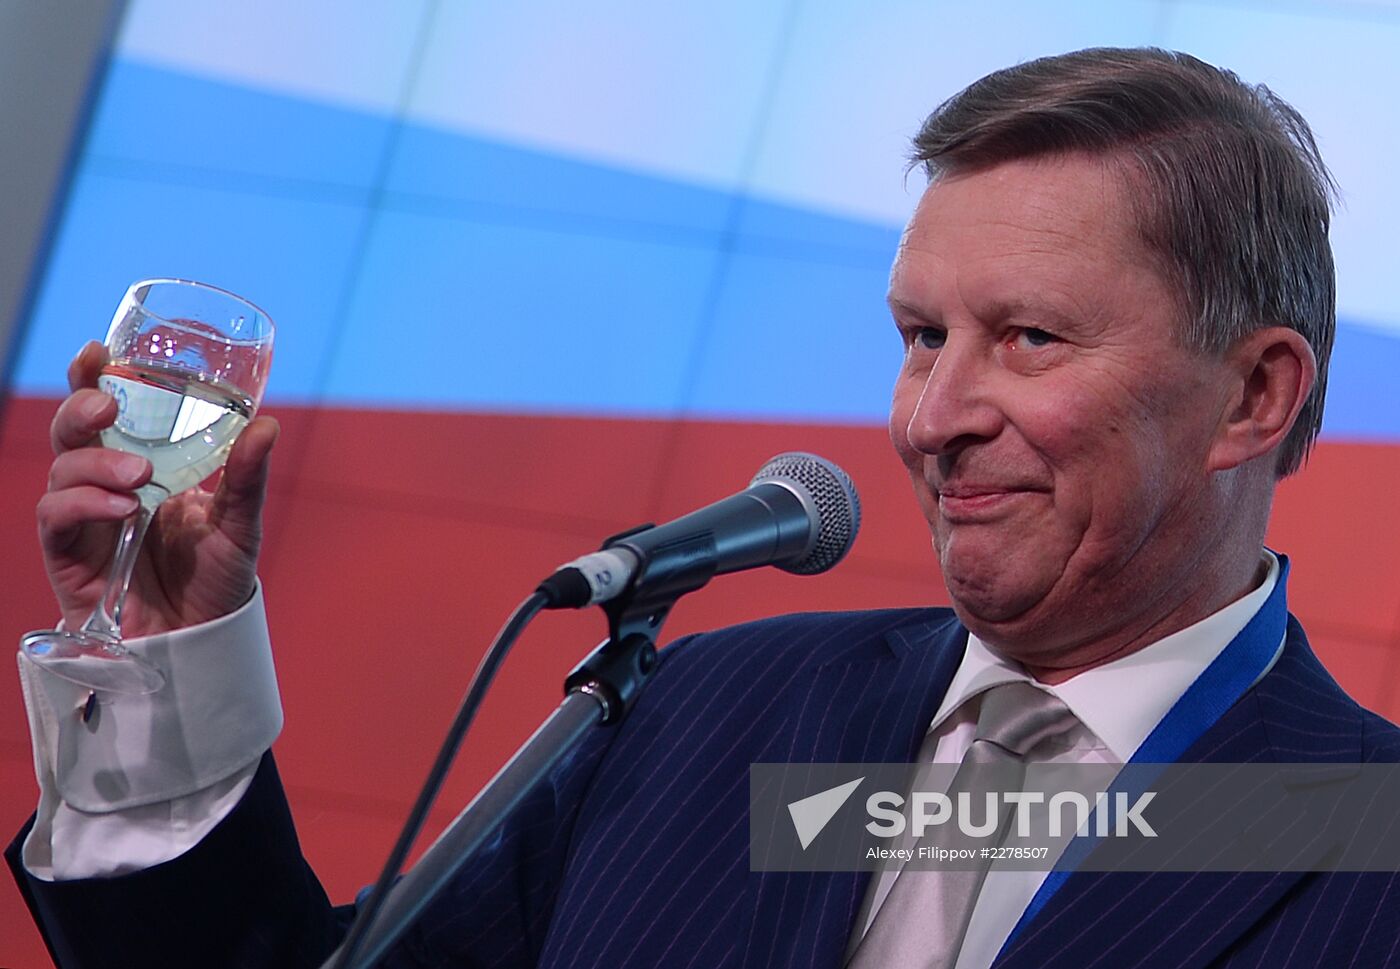 Sergei Ivanov at opening of cultural program for journalists